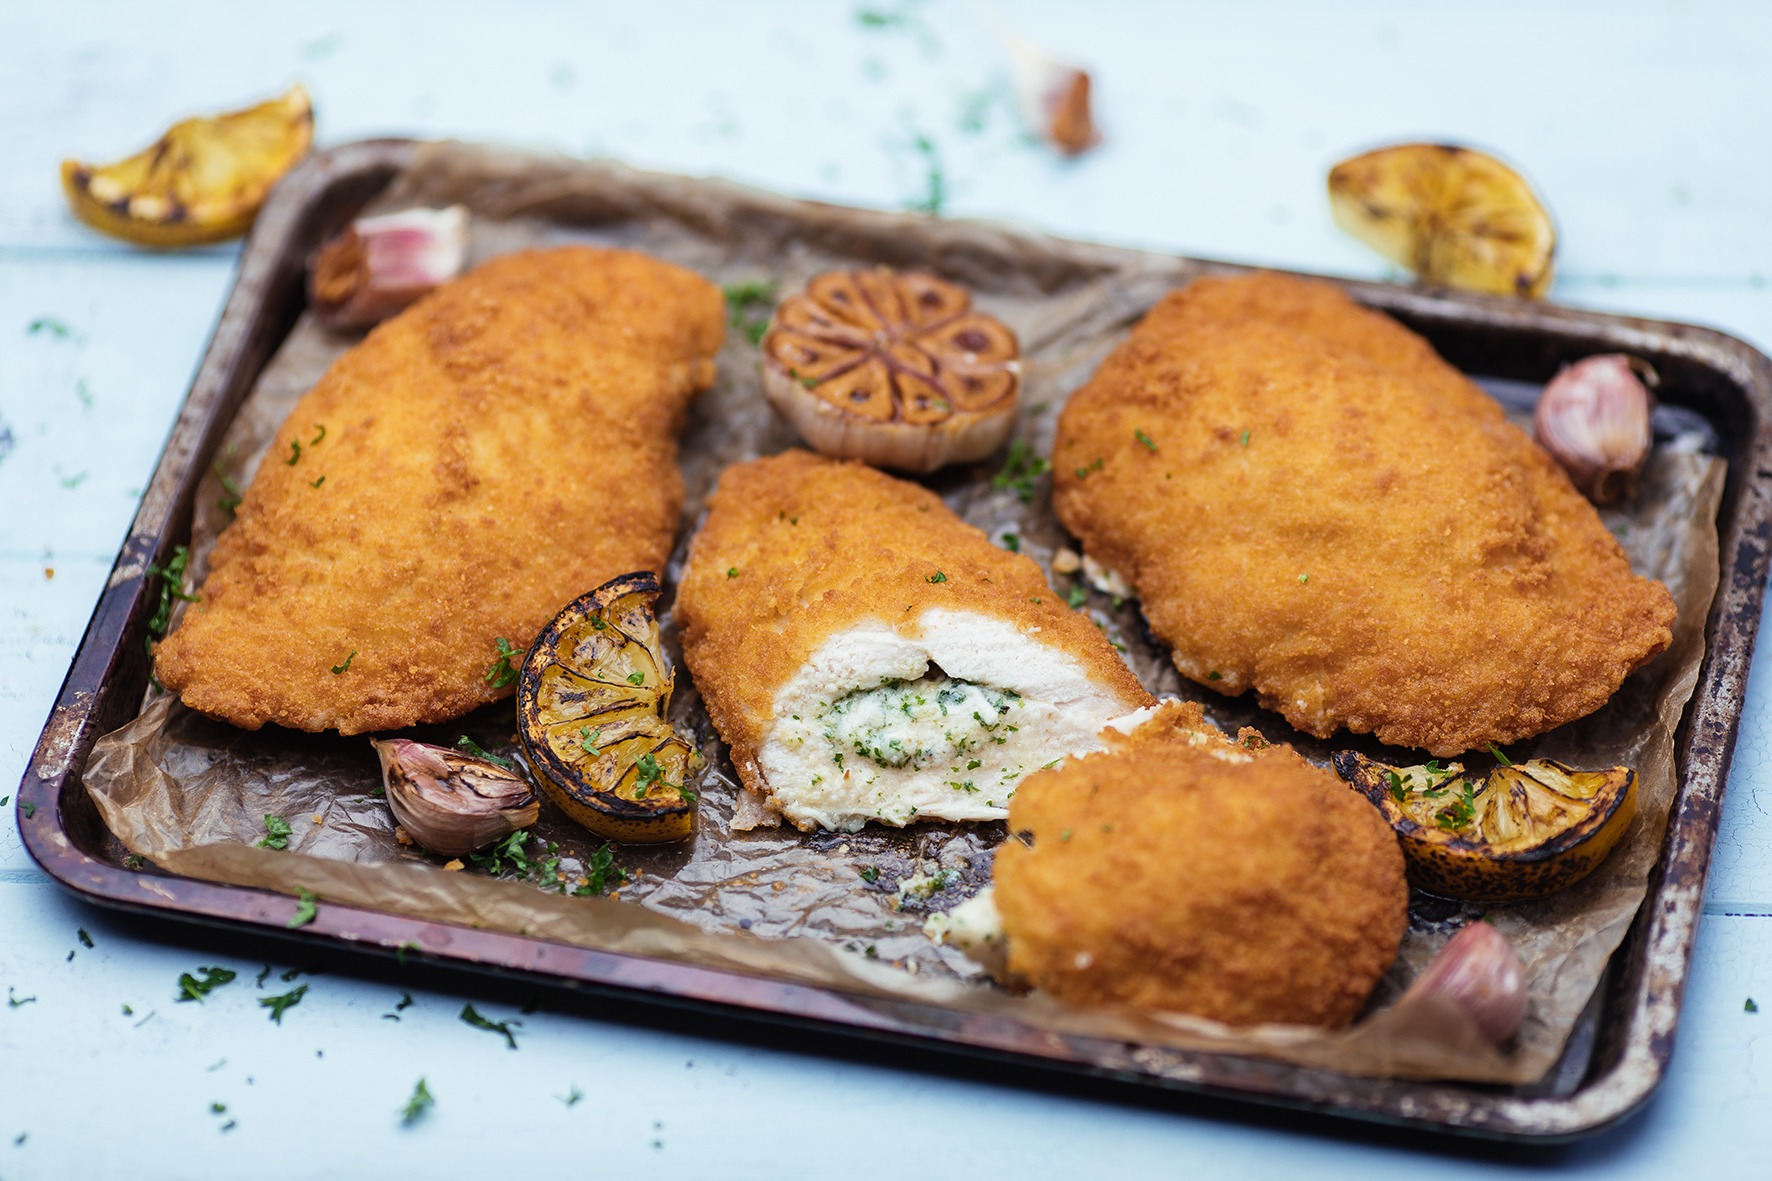 Central Foods re-introduces gluten-free chicken Kievs | Northamptonshire Chamber of Commerce